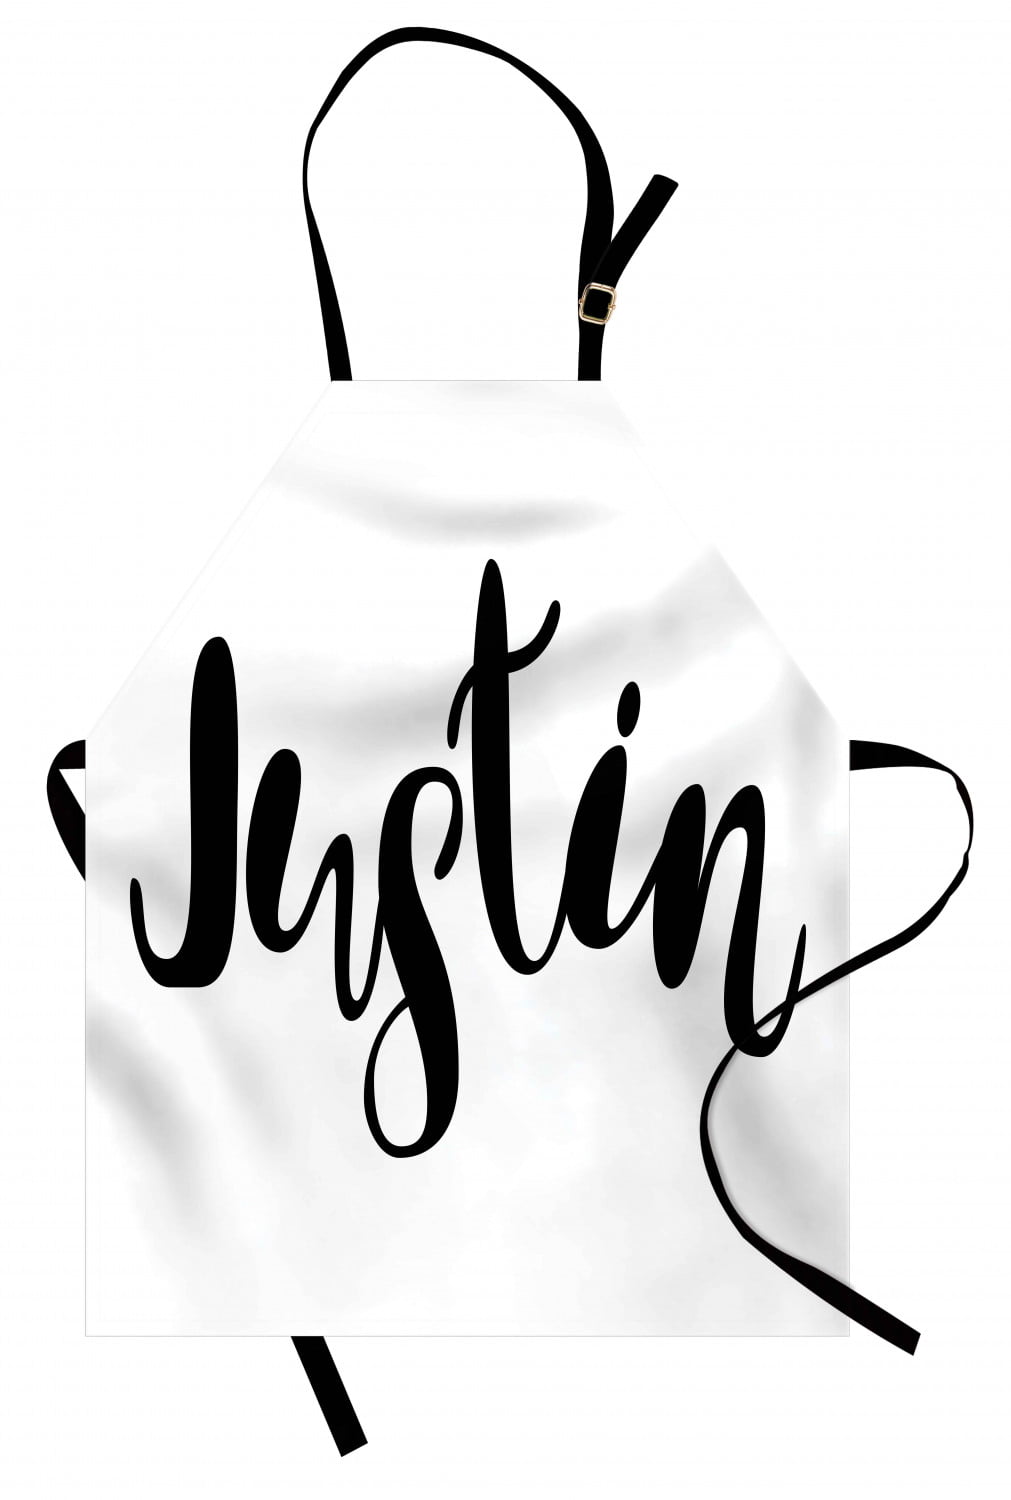 Justin Apron Modern Calligraphy with Popular Male Name Monochrome Hand ...